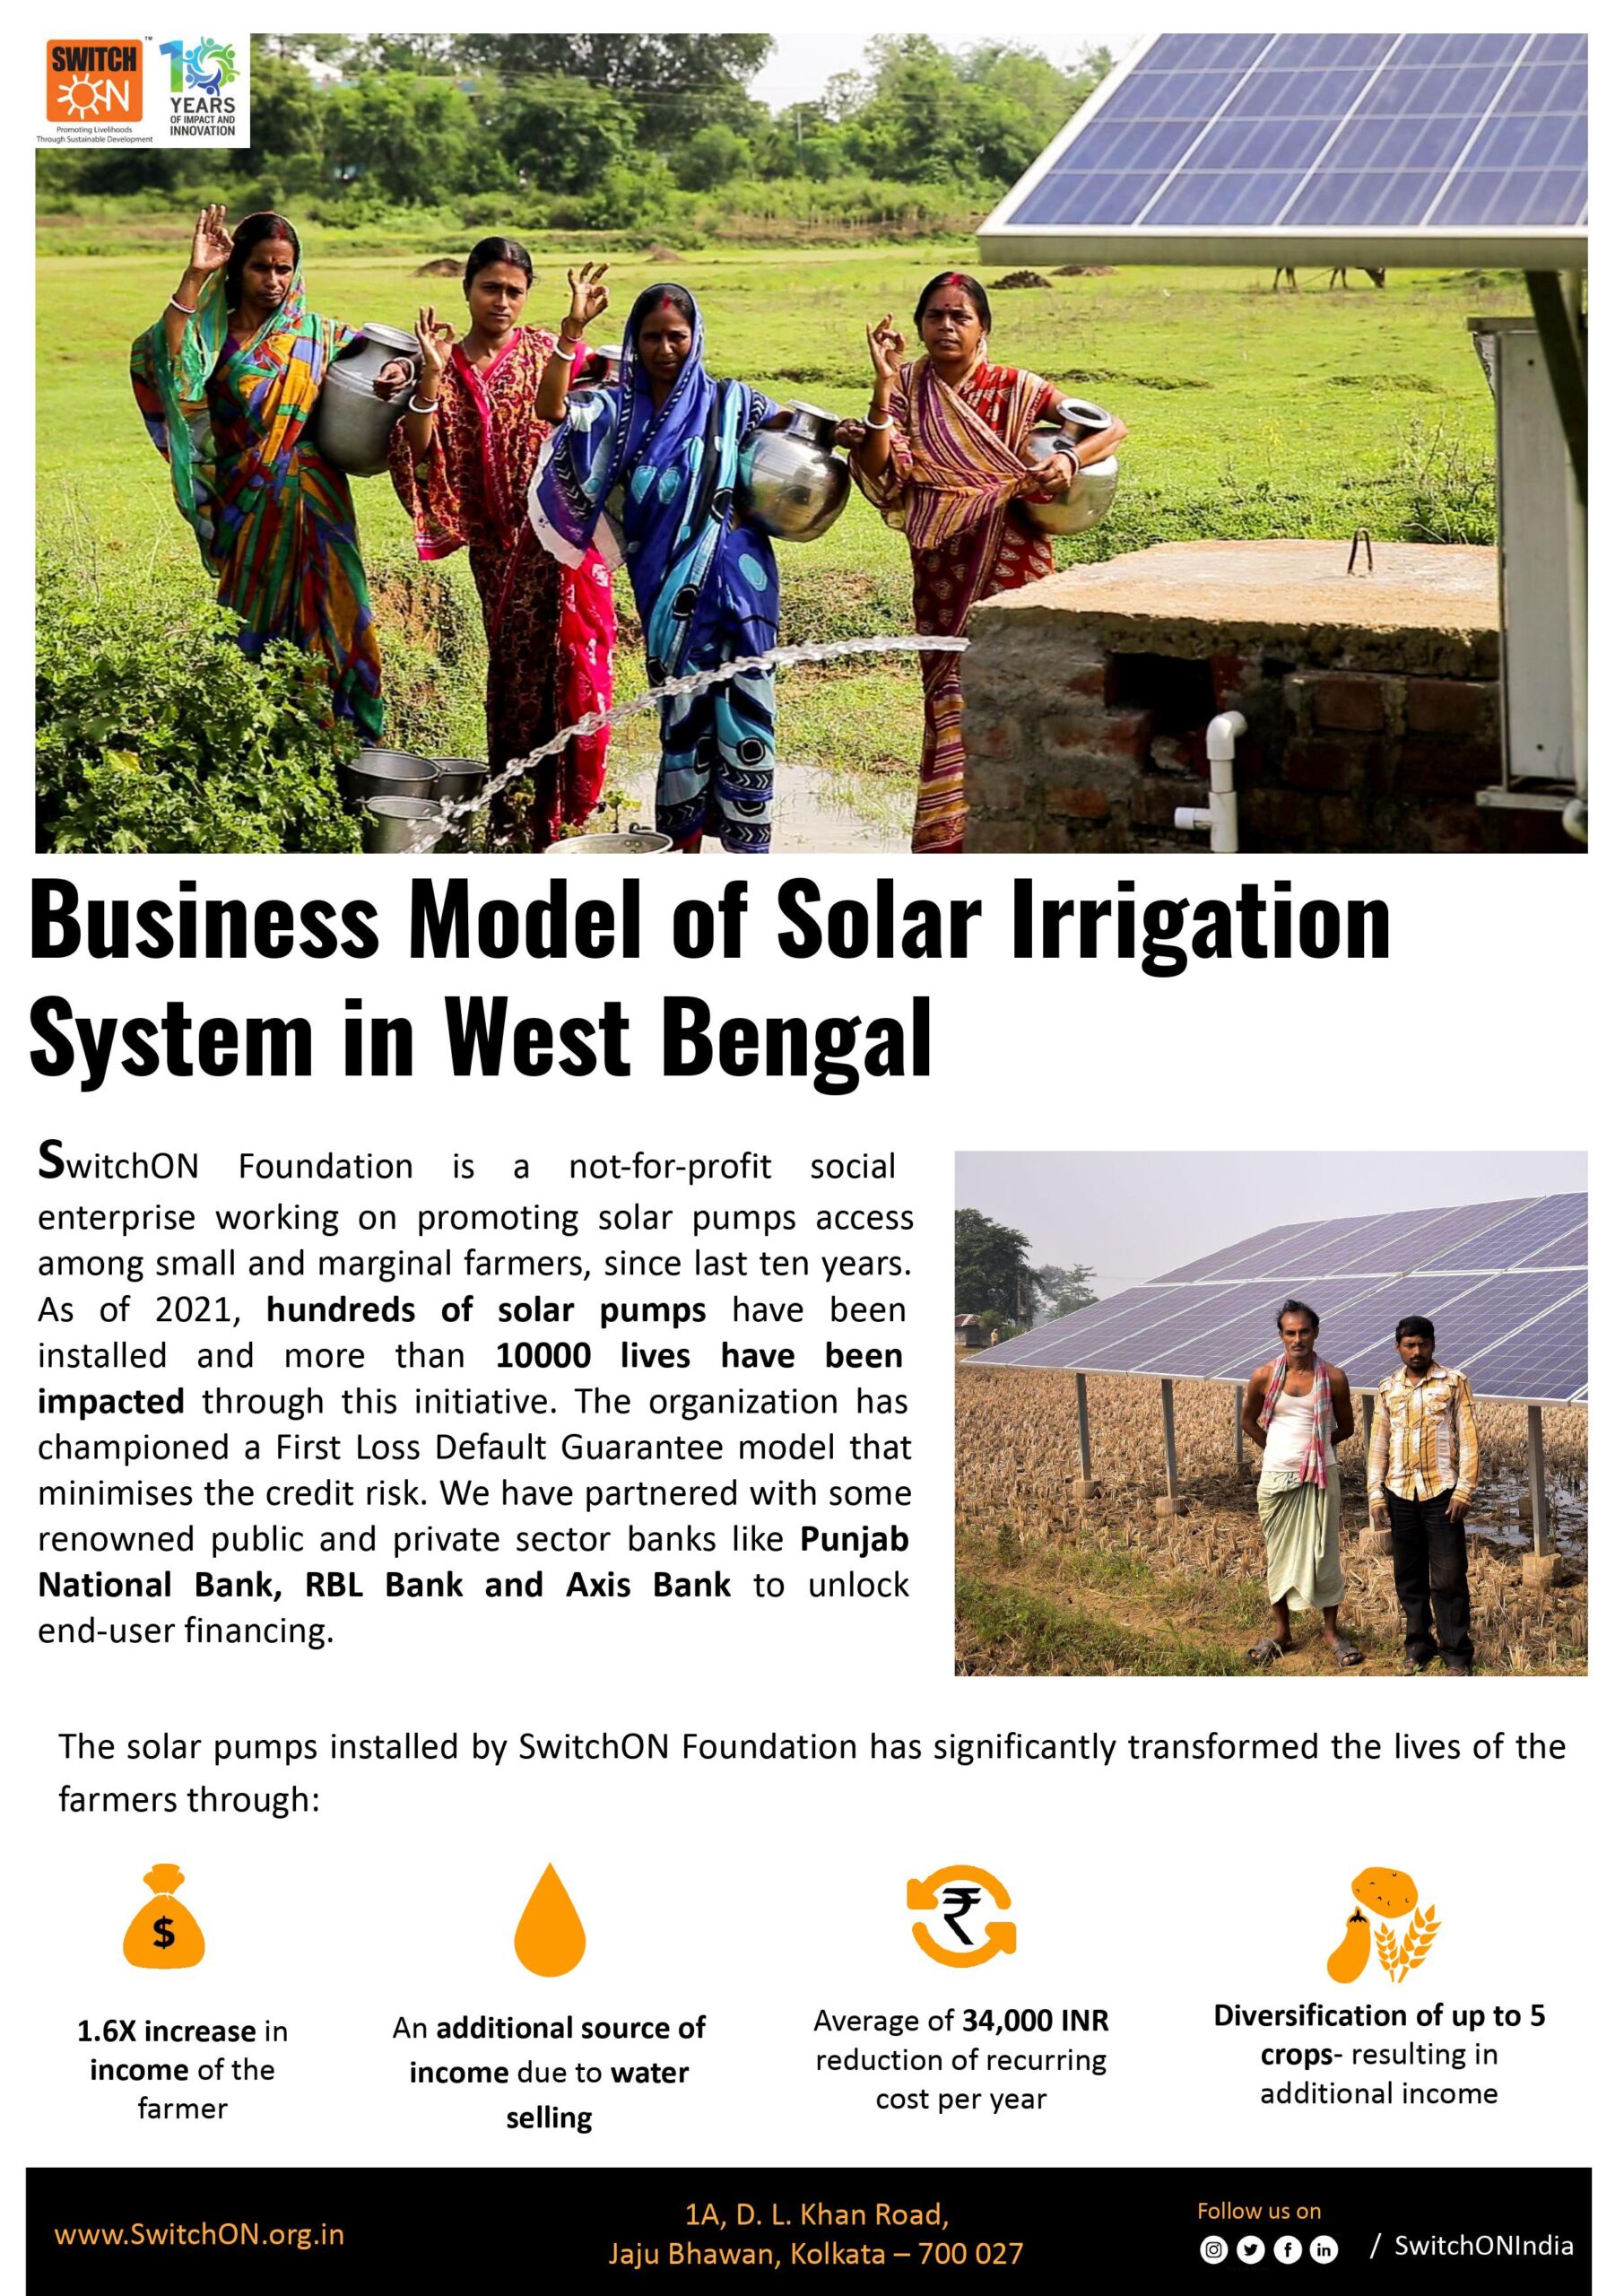 Business Model of Solar Irrigation System in West Bengal